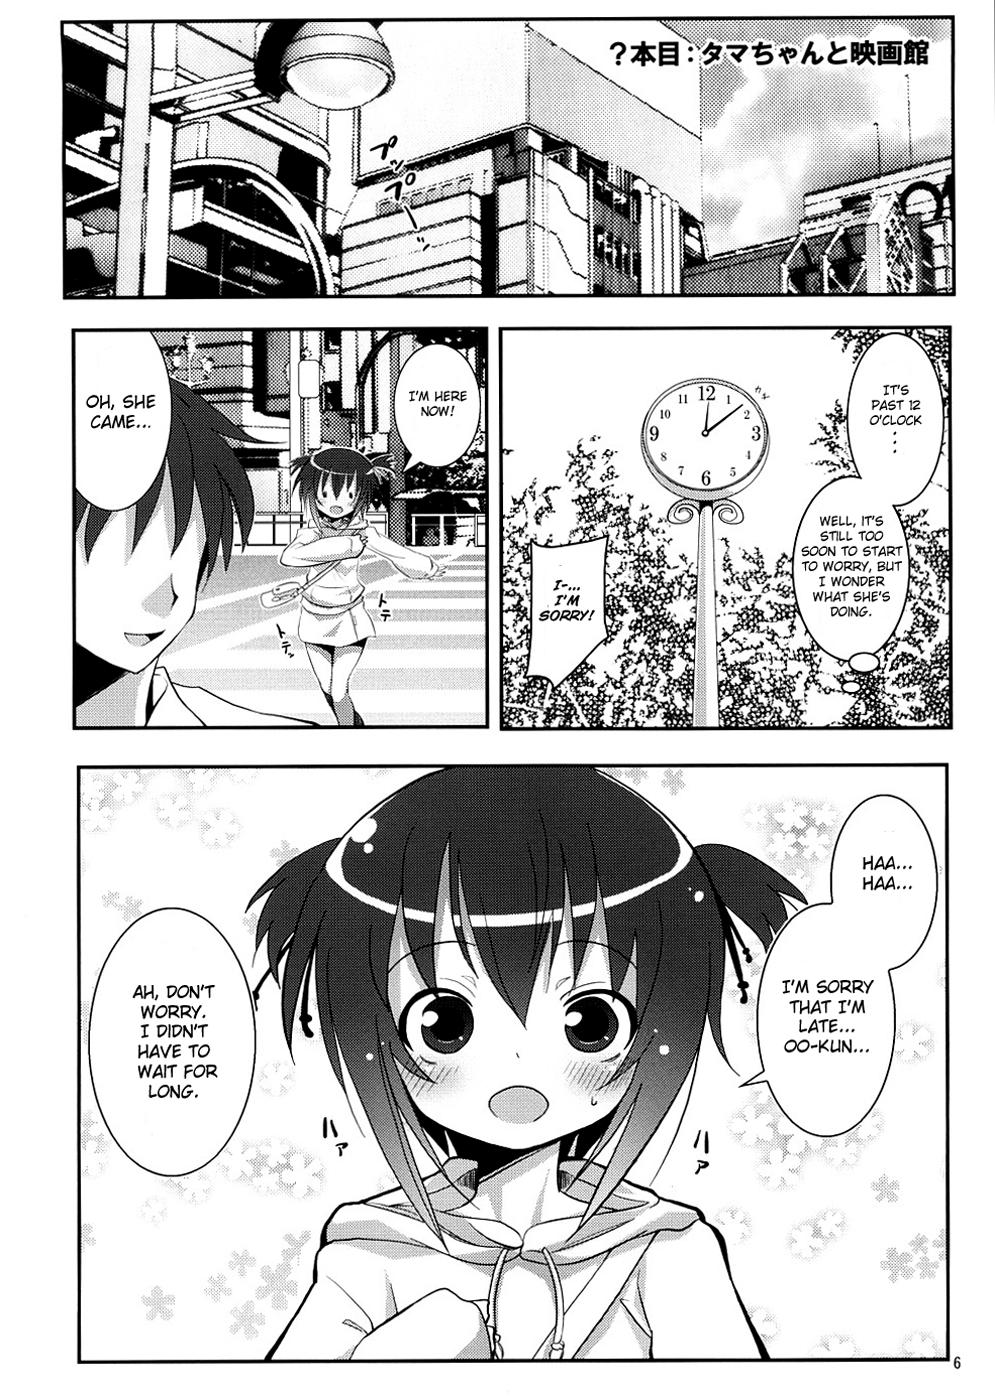 Eat Tama-chan to Date. - Bamboo blade Gay Pissing - Page 5